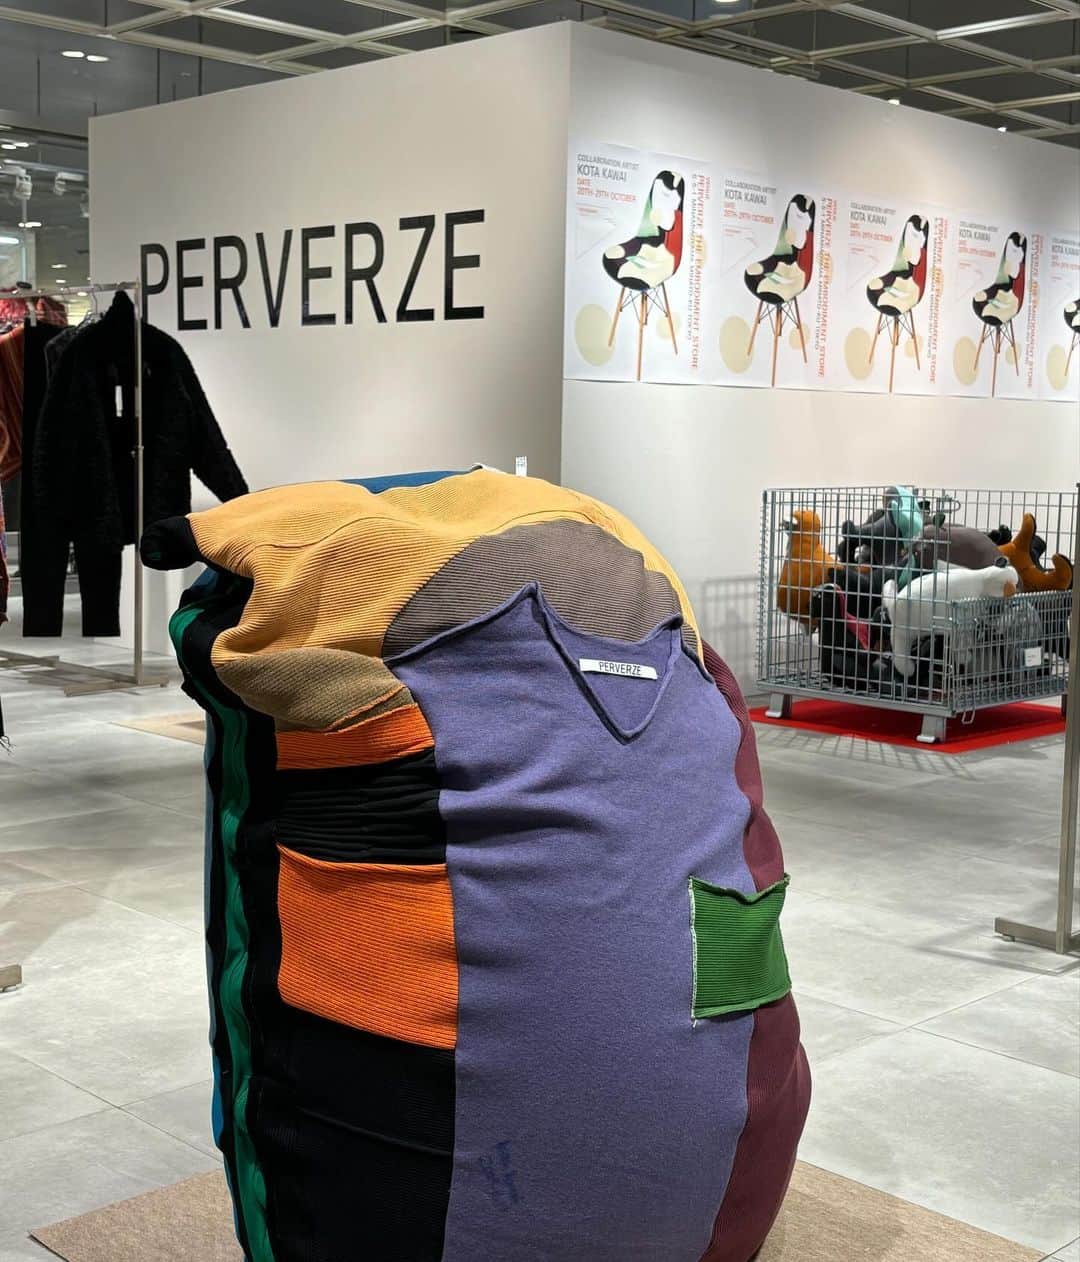 PERVERZE_OFFICIALさんのインスタグラム写真 - (PERVERZE_OFFICIALInstagram)「A exhibition of Tokyo-based brand & project "PERVERZE" is being held at Hankyu Umeda Department Store from November 1st to November 7th, 2023. This event will feature artworks presented at "DESIGNART TOKYO 2023", one of Japan's largest design & art festivals currently being held in Omotesando, Tokyo from October 20th to 29th, 2023. PERVERZE's latest Fall/Winter collection will also be on display. The artwork on display is a collaborative work created by up-and-coming artist KOTA KAWAI @_kotakawai using PERVERZE's archives.  During this period, customers who purchase 30,000 yen (tax included) or more will receive a limited edition gift. (Supplies very limited.)  2023年11月1日(水)〜11月7日(火)の期間、阪急うめだ百貨店にて東京発ブランド＆プロジェクト「PERVERZE」の特別展を開催しております。  本イベントでは、2023年10月20日(金)〜29日(日)の期間に東京・表参道を中心に開催中の日本最大級のデザイン&アートフェスティバル「DESIGNART TOKYO 2023」にて発表されたアート作品を展示する他、PERVERZEの最新秋冬コレクションもご覧いただけます。 展示するアート作品は、気鋭のアーティスト「KOTA KAWAI」がPERVERZEのアーカイブを使用し制作したコラボレーション作品となっています。  期間中、30,000円（税込）以上ご購入のお客様に限定ノベルティをプレゼントいたします。（無くなり次第終了となります。）  Space direction by @formula_sds   【STORE INFORMATION】 阪急うめだ本店 3階 / コトコトステージ 31 ADDRESS: 大阪府大阪市北区角田町8-7 TEL: 06-6361-1381 TIME: 10:00〜20:00  #PERVERZE #AW23」11月2日 17時36分 - perverze_official